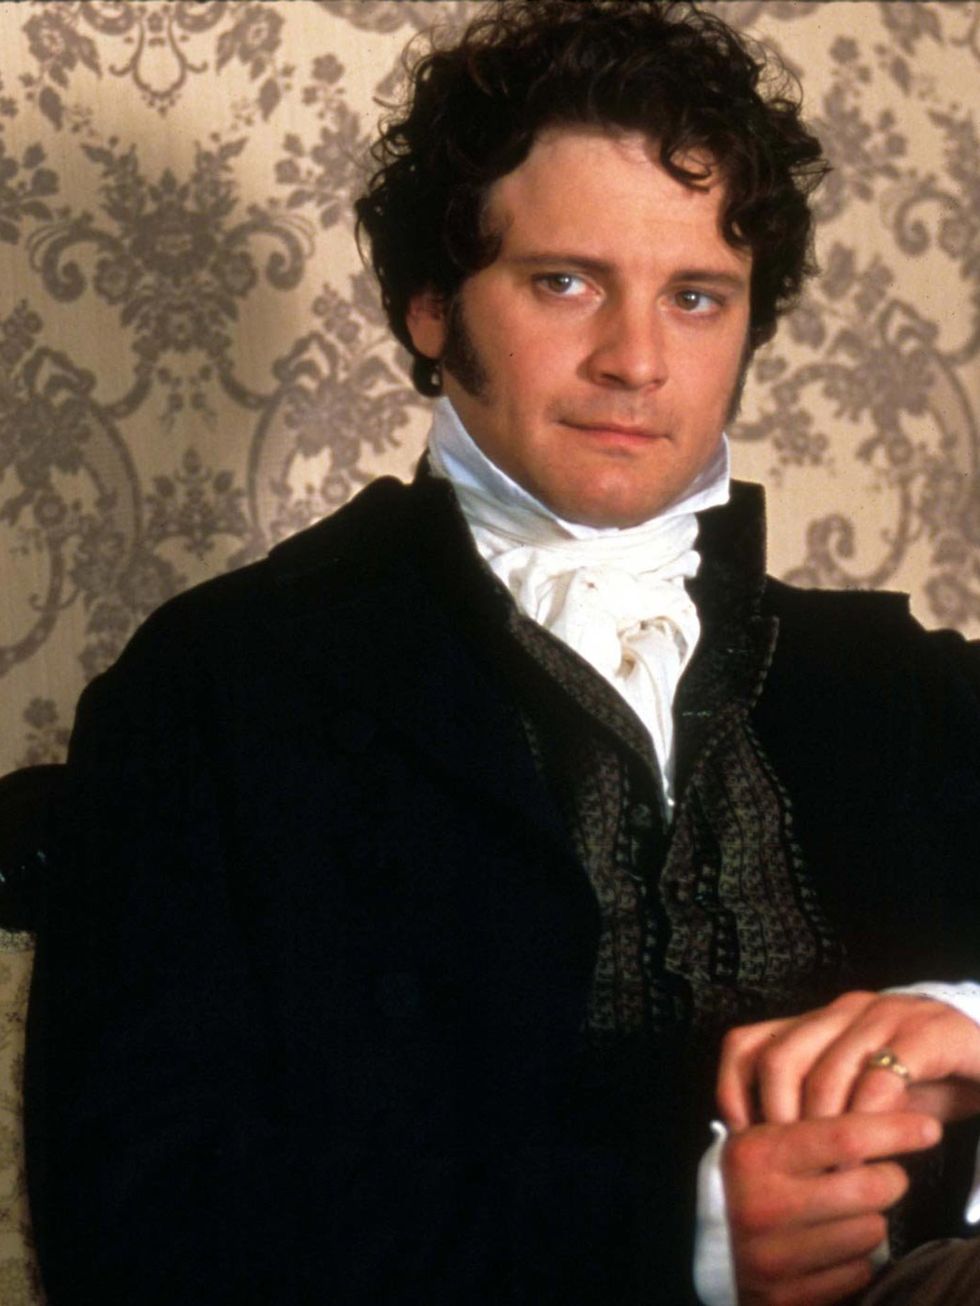 <p>Colin Firth as <a href="http://www.elleuk.com/star-style/celebrity-style-files/mr-darcy-elle-man-of-the-week">Mr Darcy</a>. Nuff said.</p>